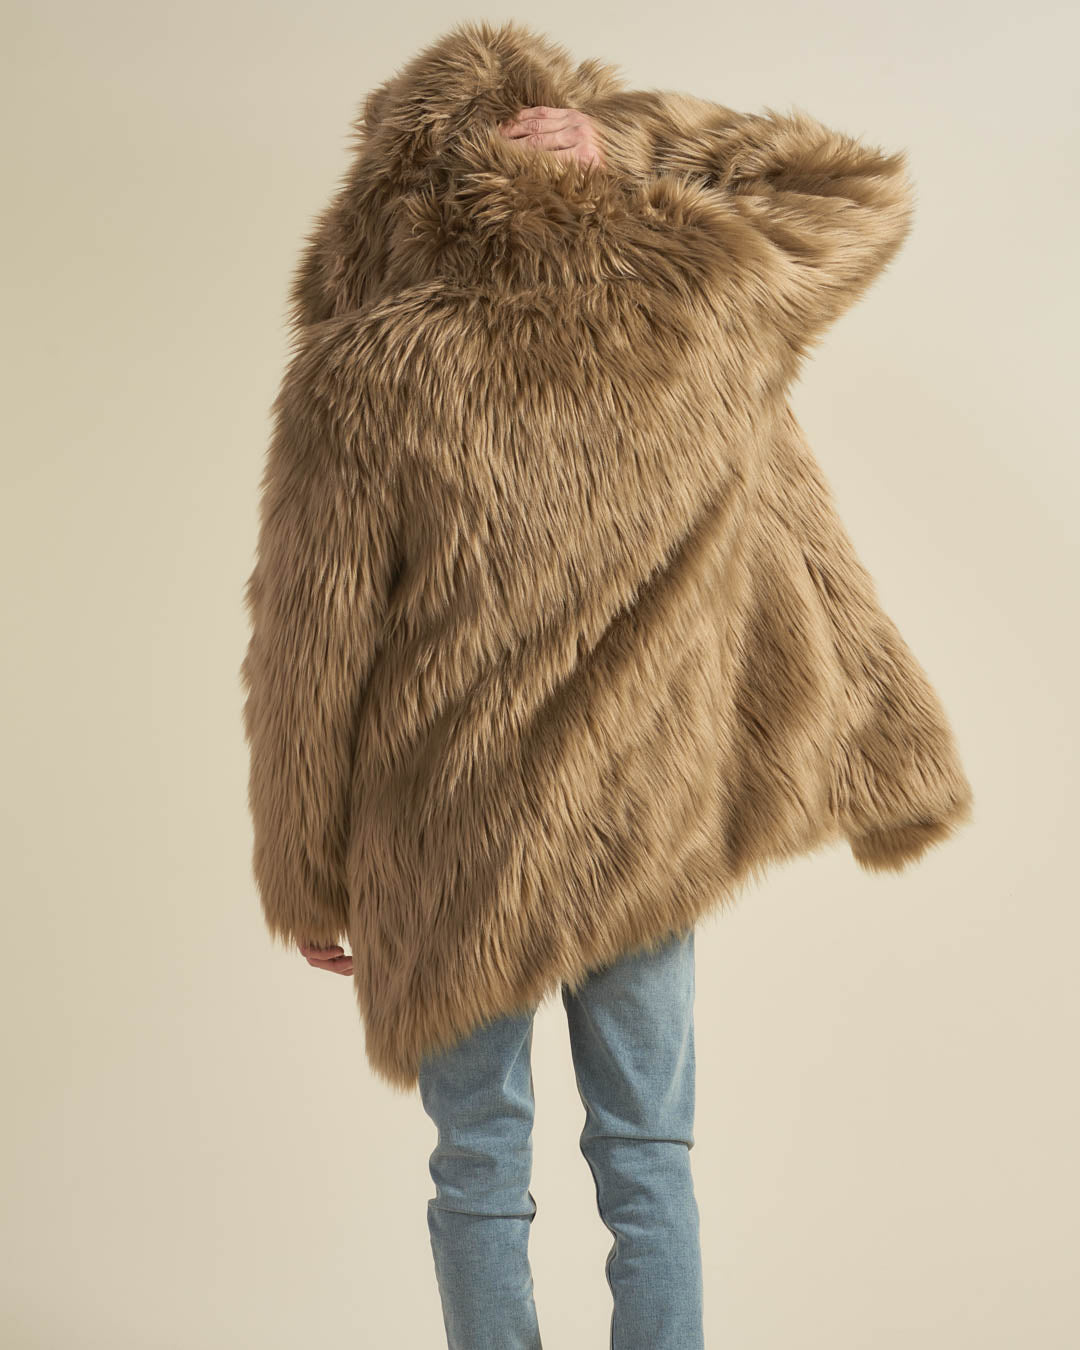 Back View of Ash Wolf Classic Faux Fur Coat on Man